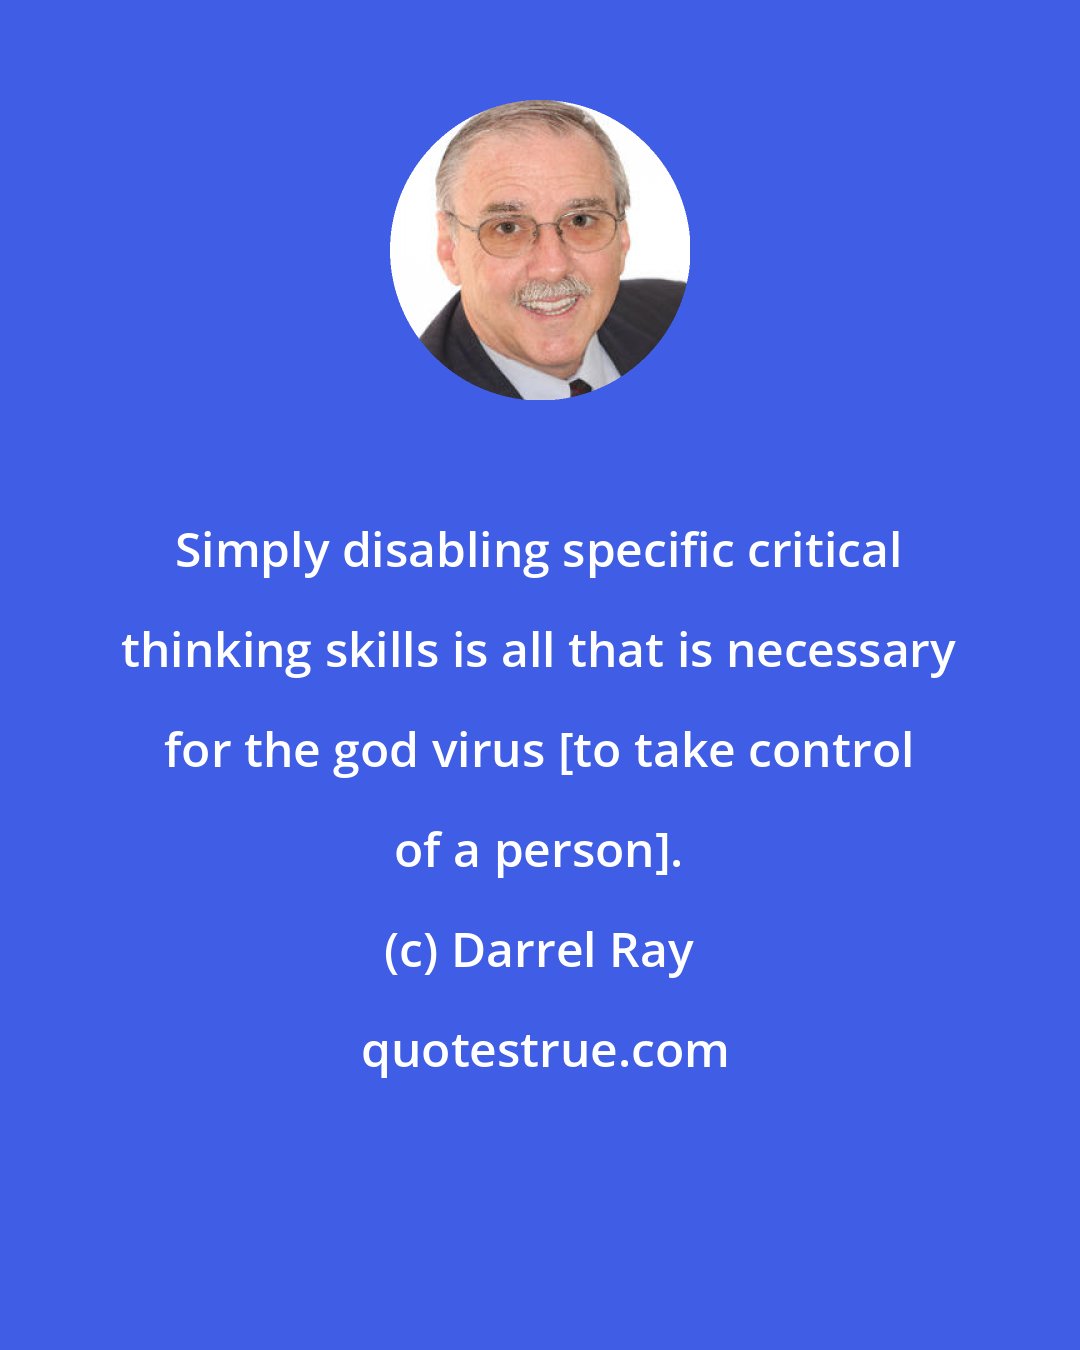 Darrel Ray: Simply disabling specific critical thinking skills is all that is necessary for the god virus [to take control of a person].